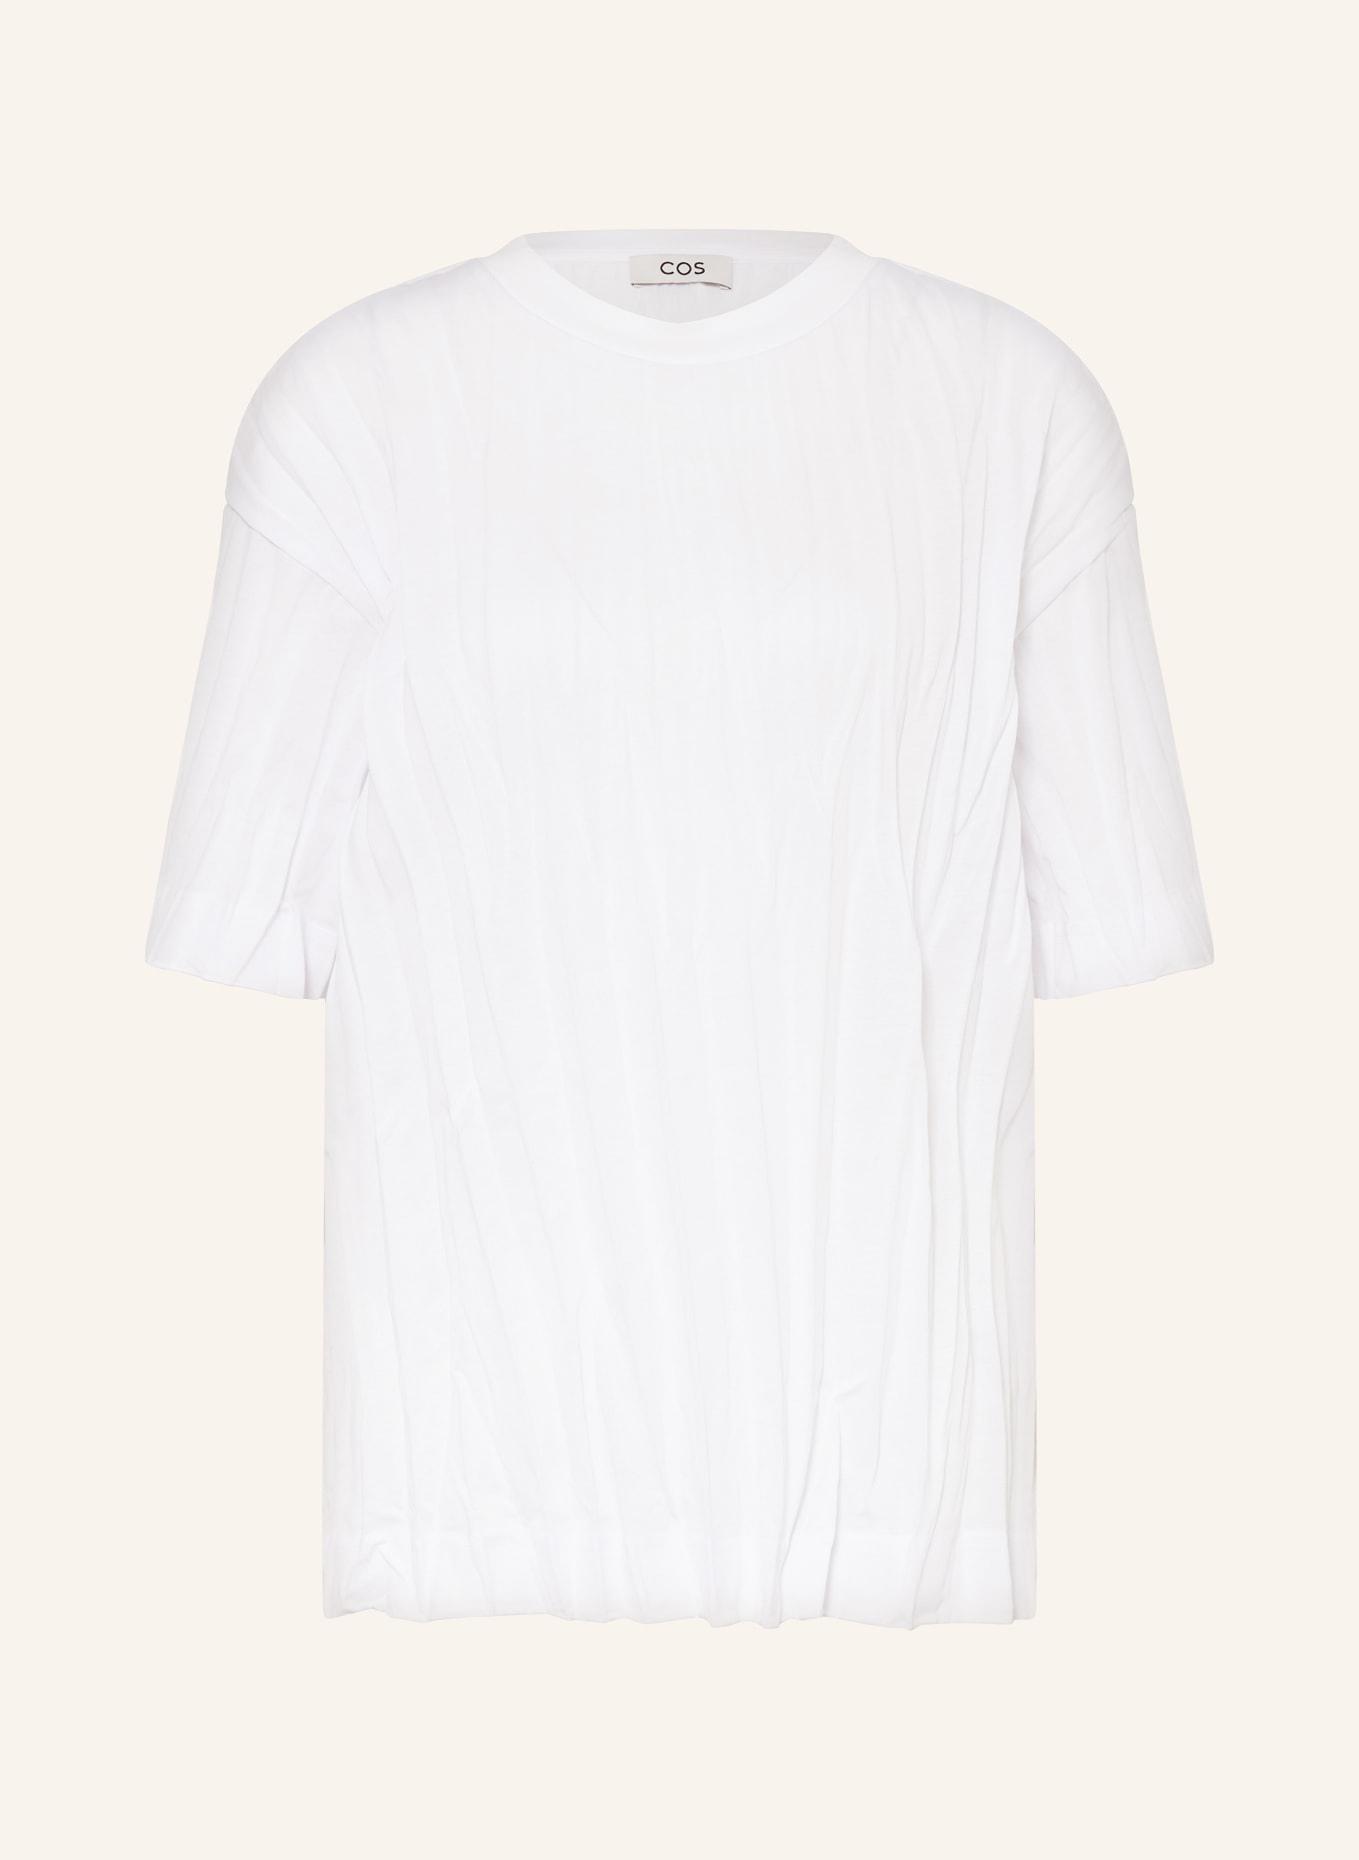 COS T-shirt with pleats, Color: WHITE (Image 1)